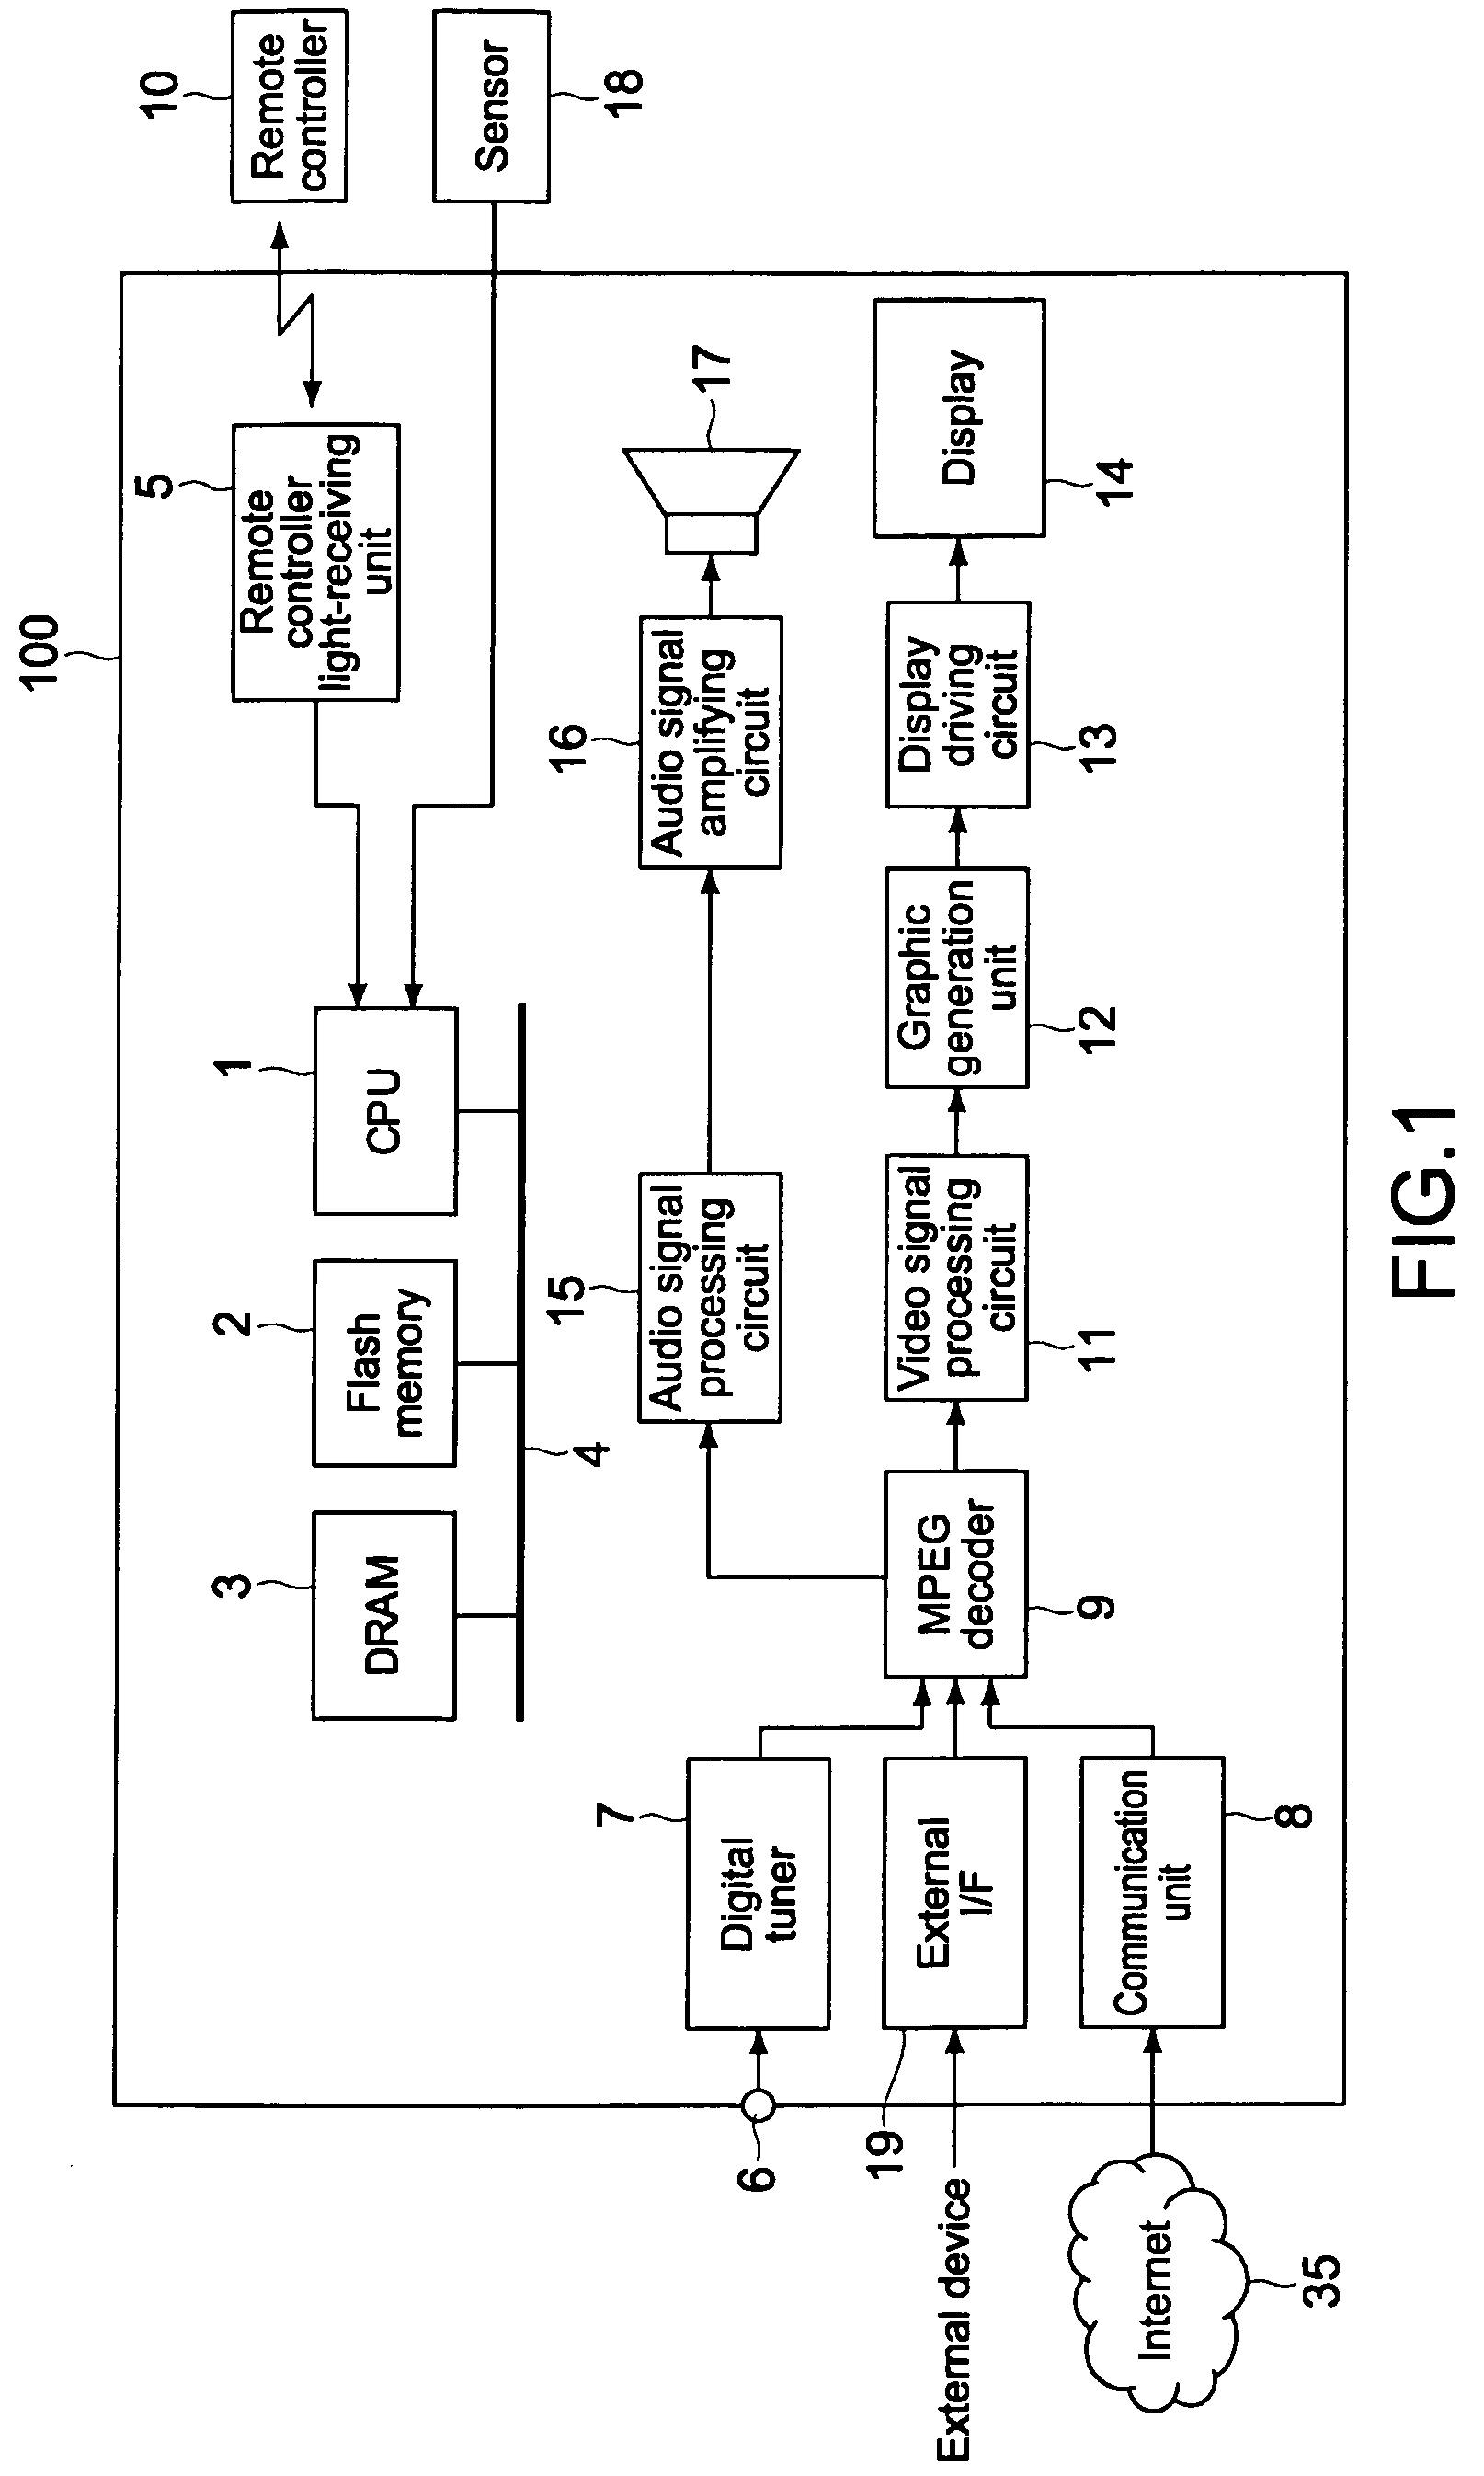 Electronic apparatus, reproduction control system, reproduction control method, and program therefor